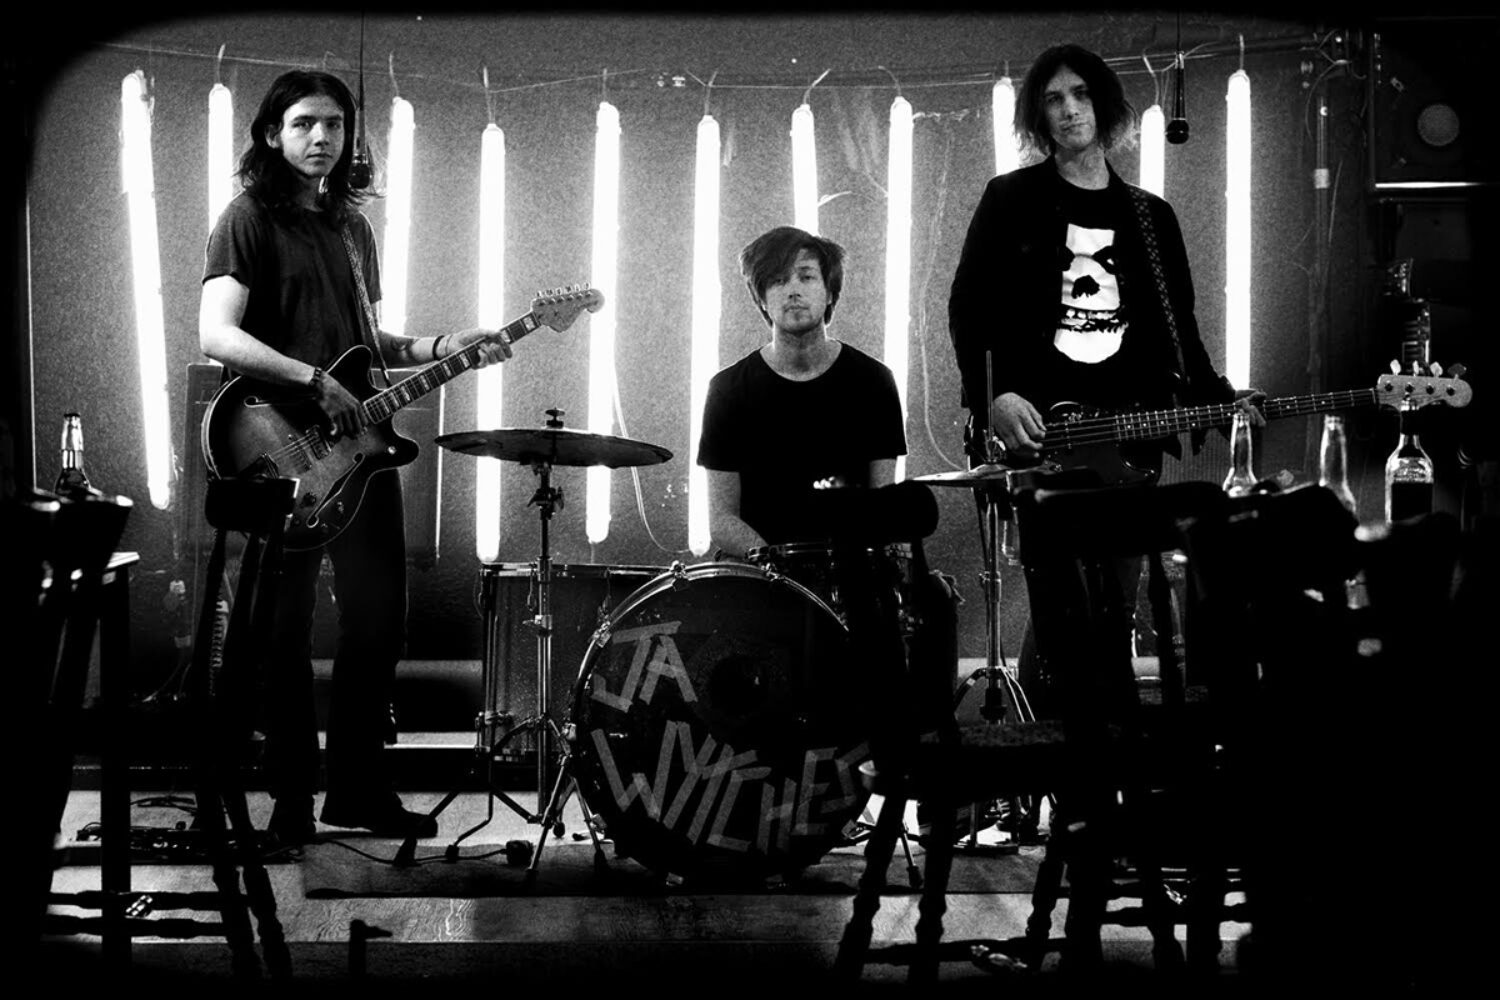 The Wytches have a new cassette EP, out today